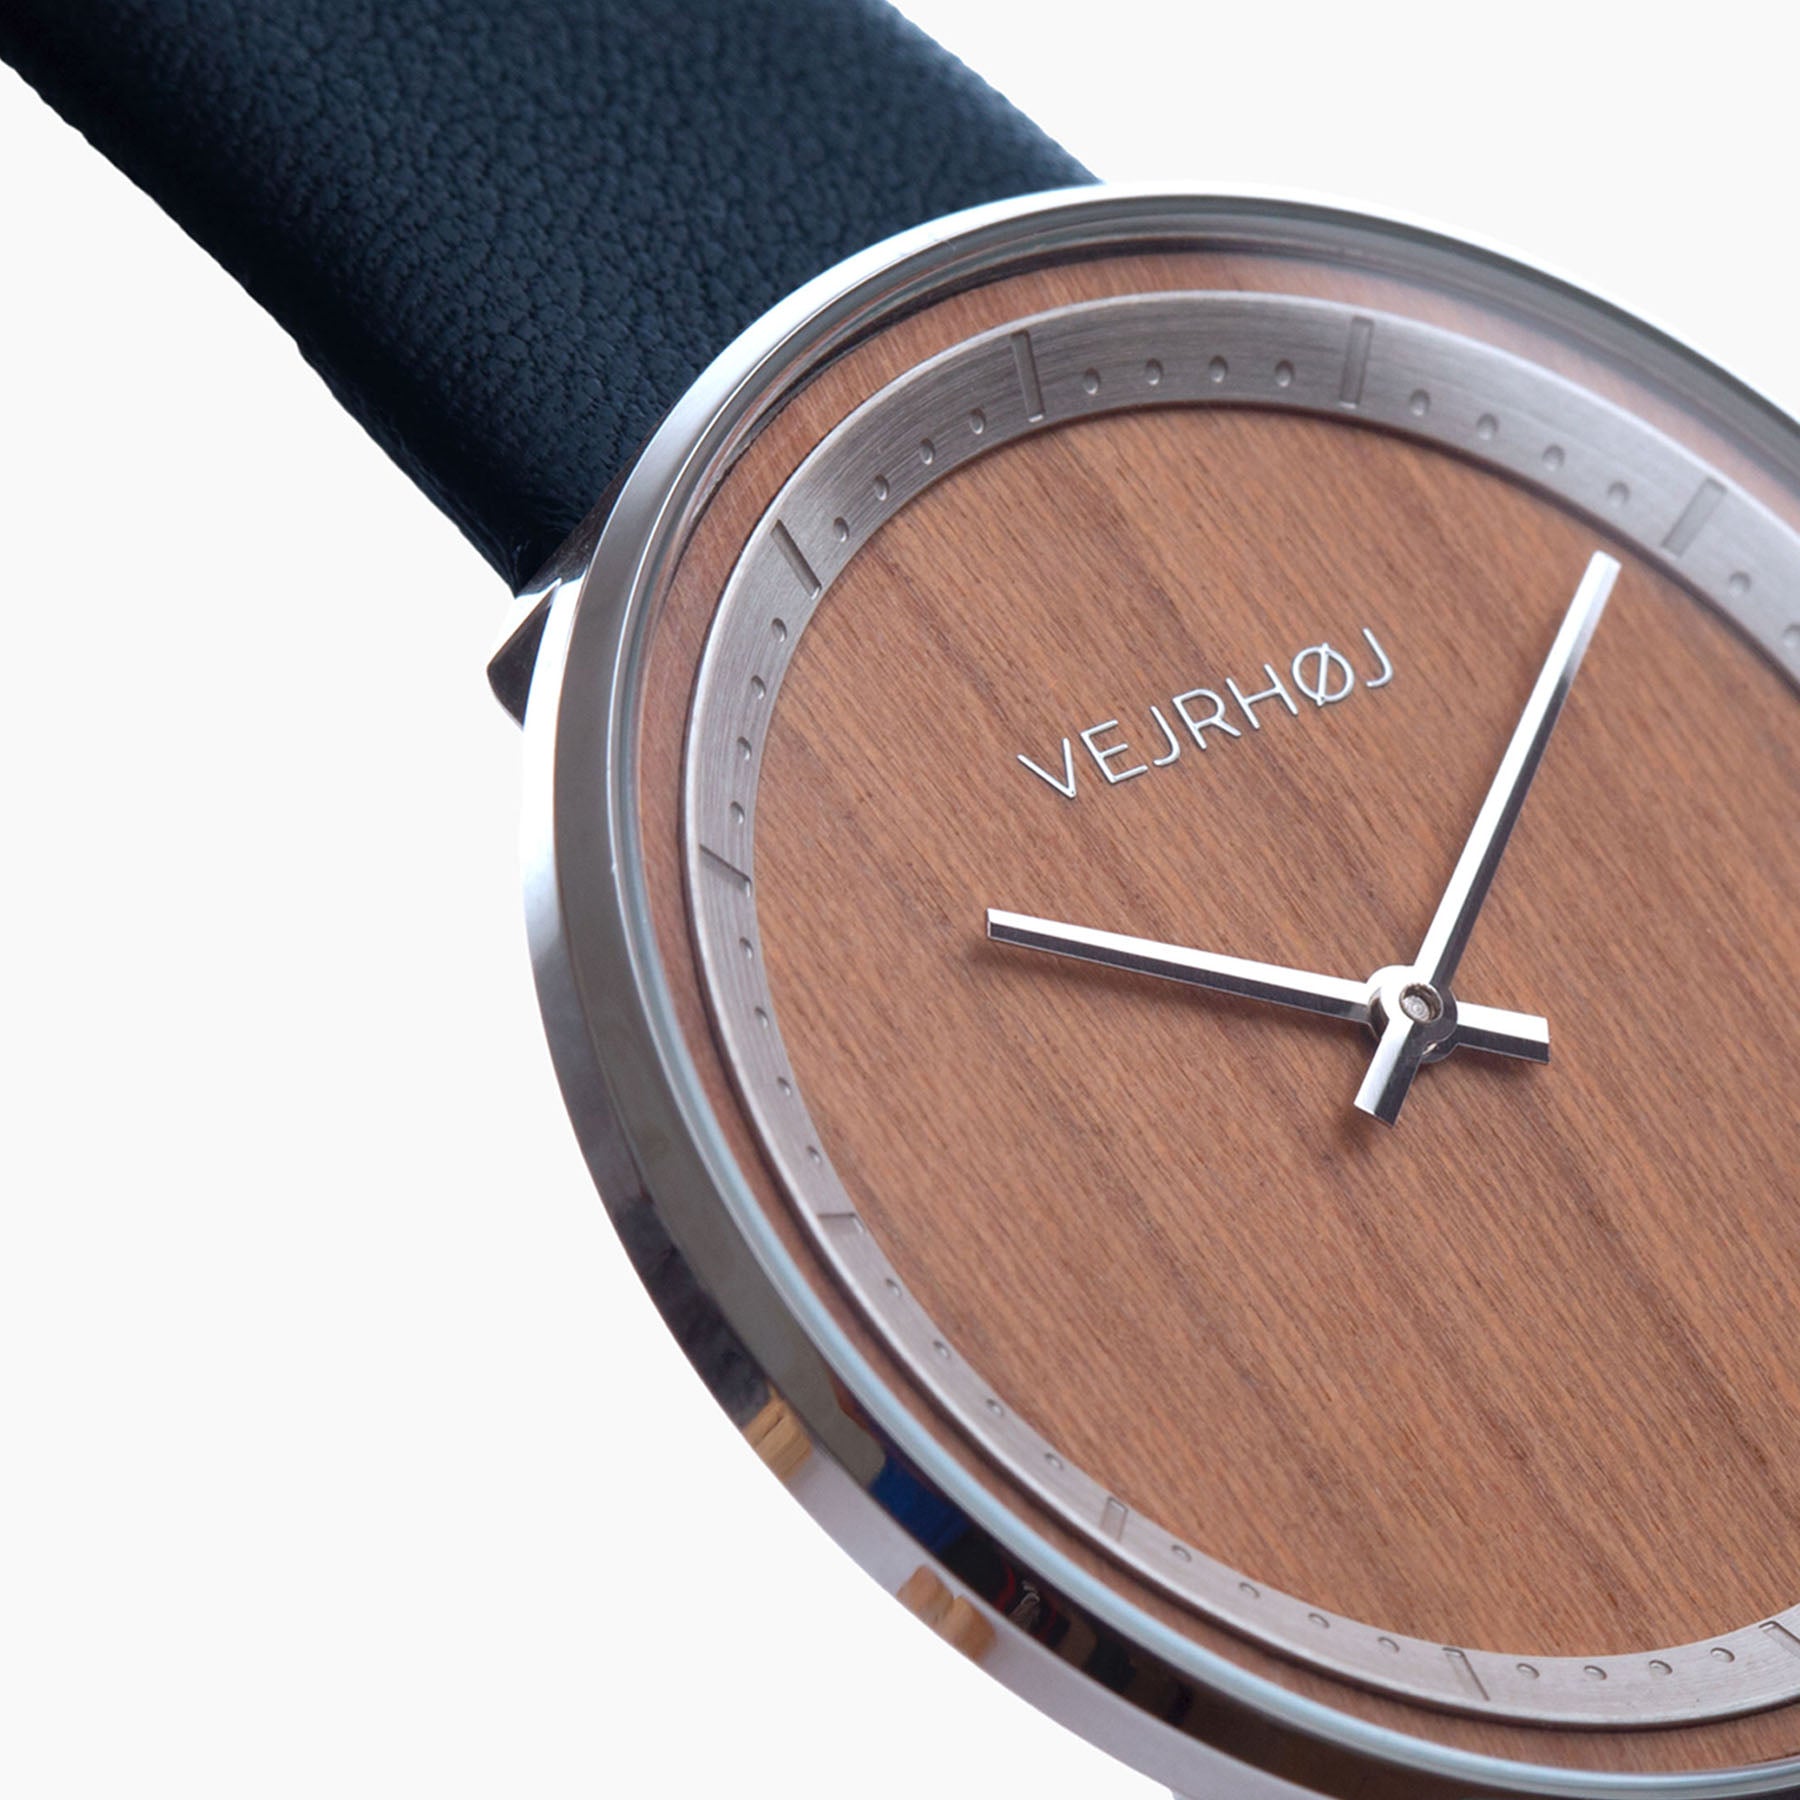 Closeup of wooden watch with silver hands and steel casing